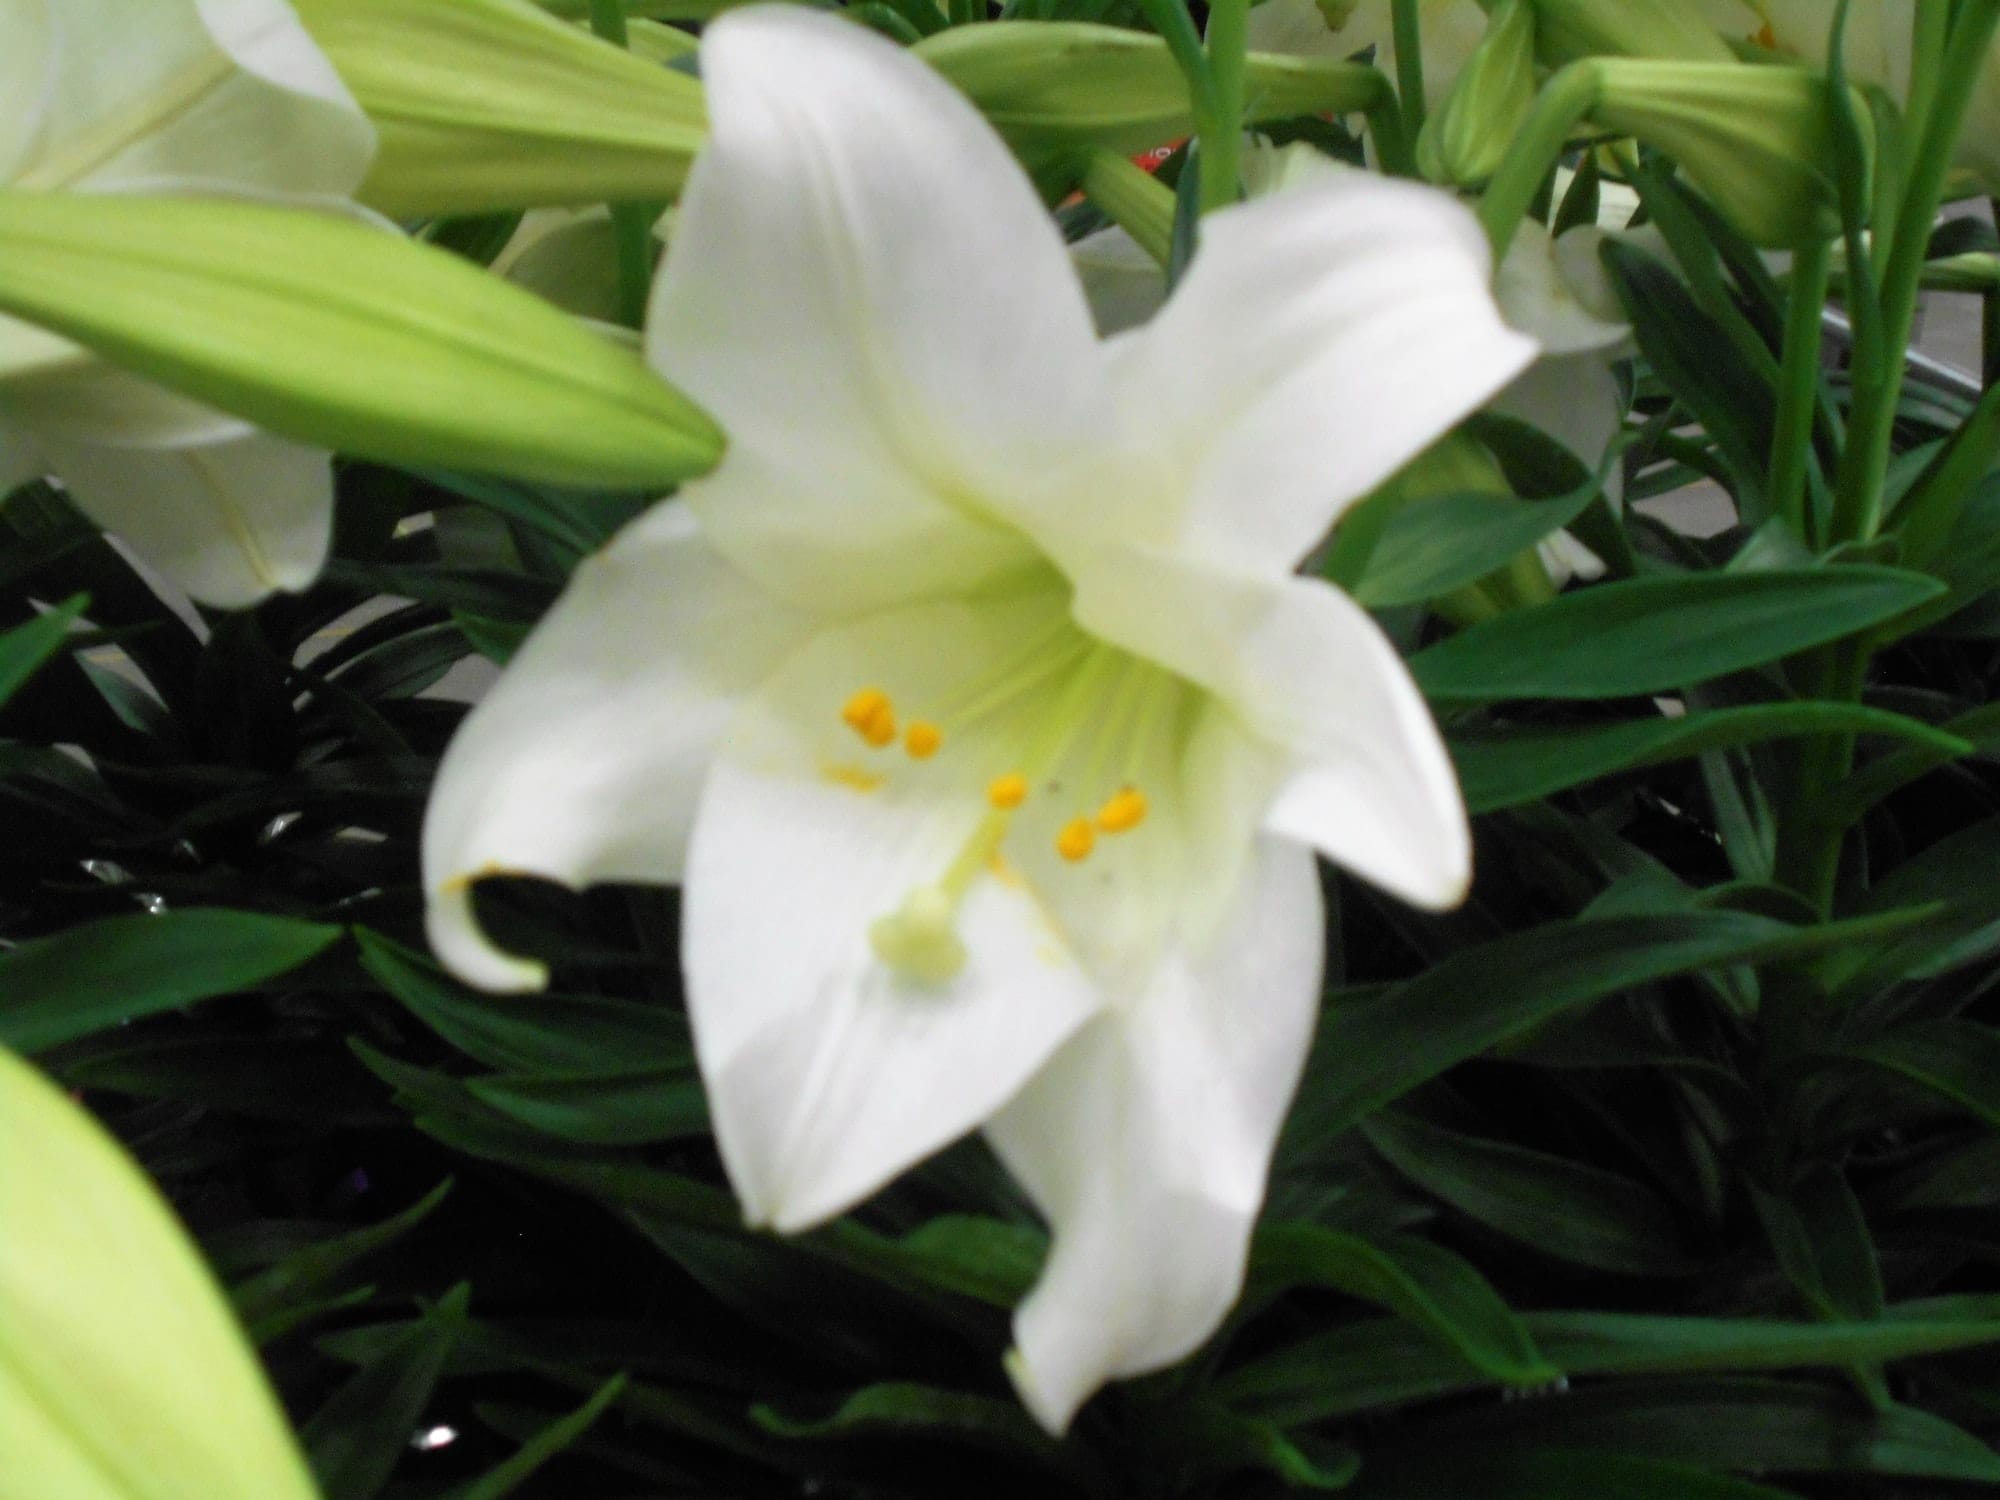 Easter Lily Flower! A beautiful, pure white lily flower to celebrate Easter.